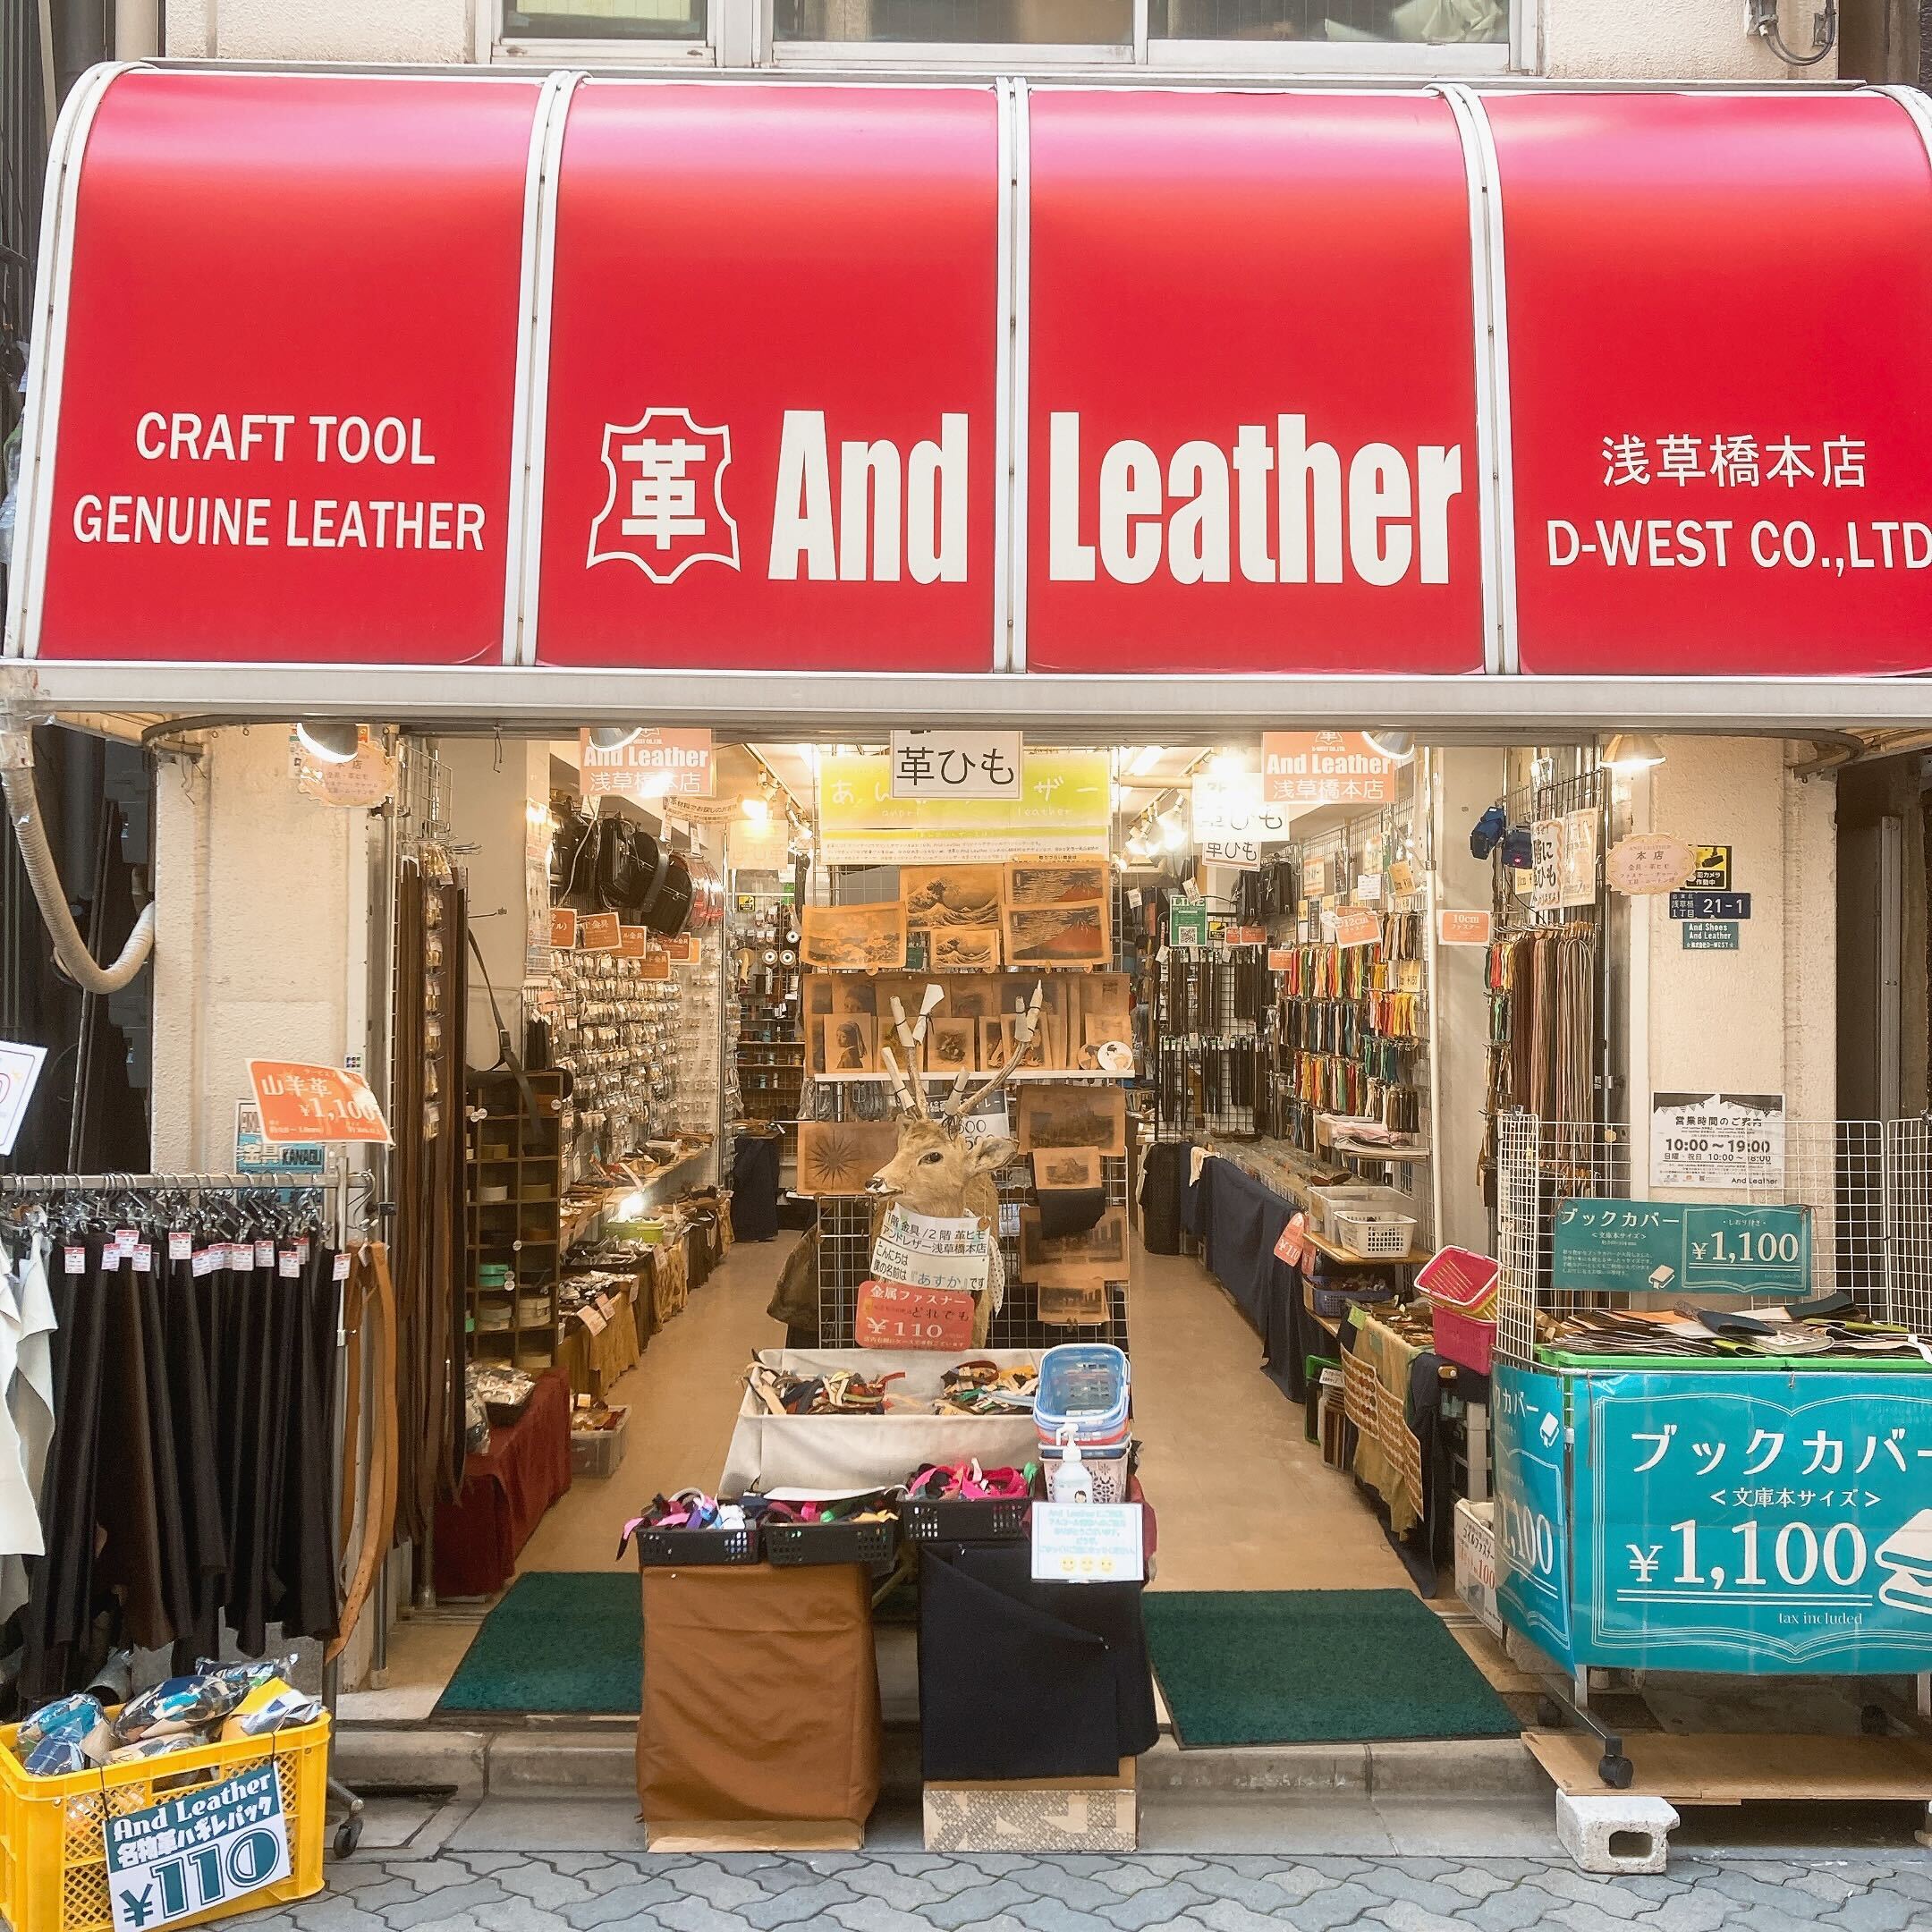 And Leather 実店舗のご案内